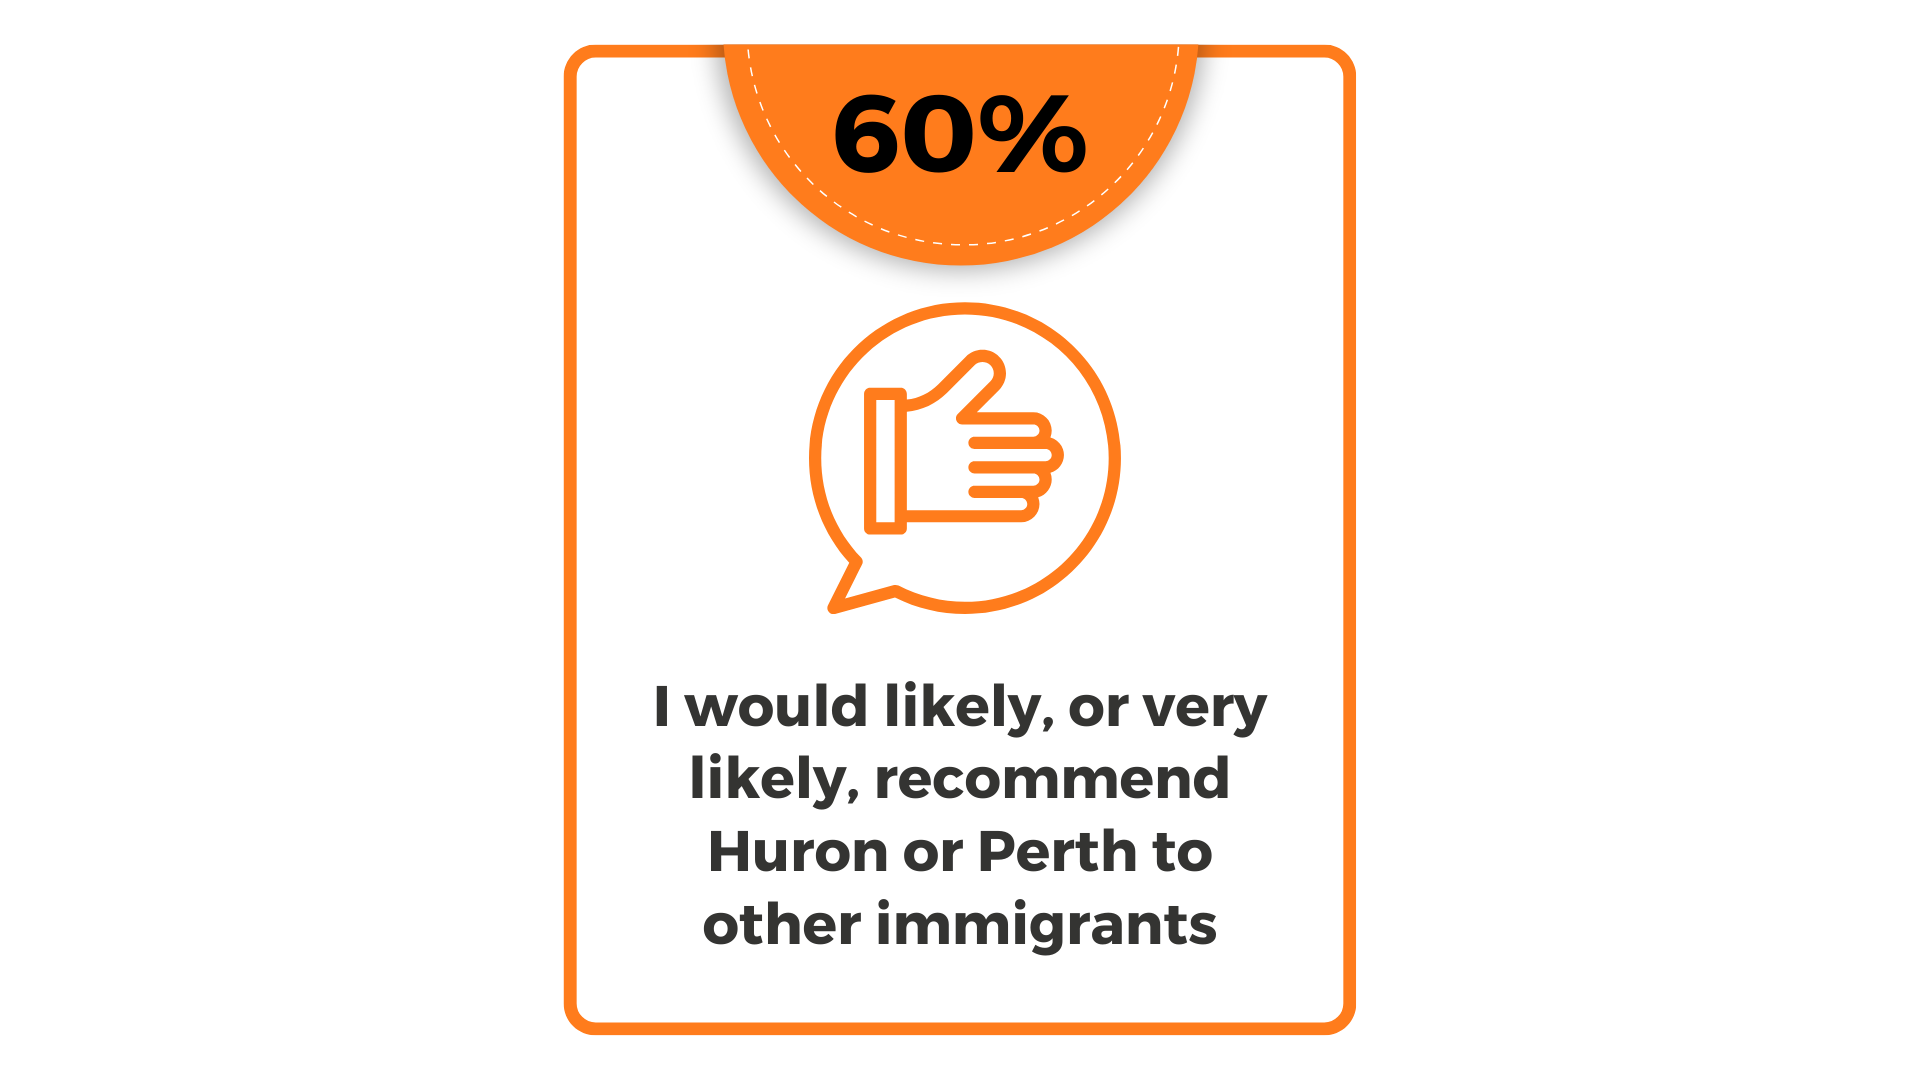 60% said they would likely or very likely recommend Huron or Perth to other immigrants